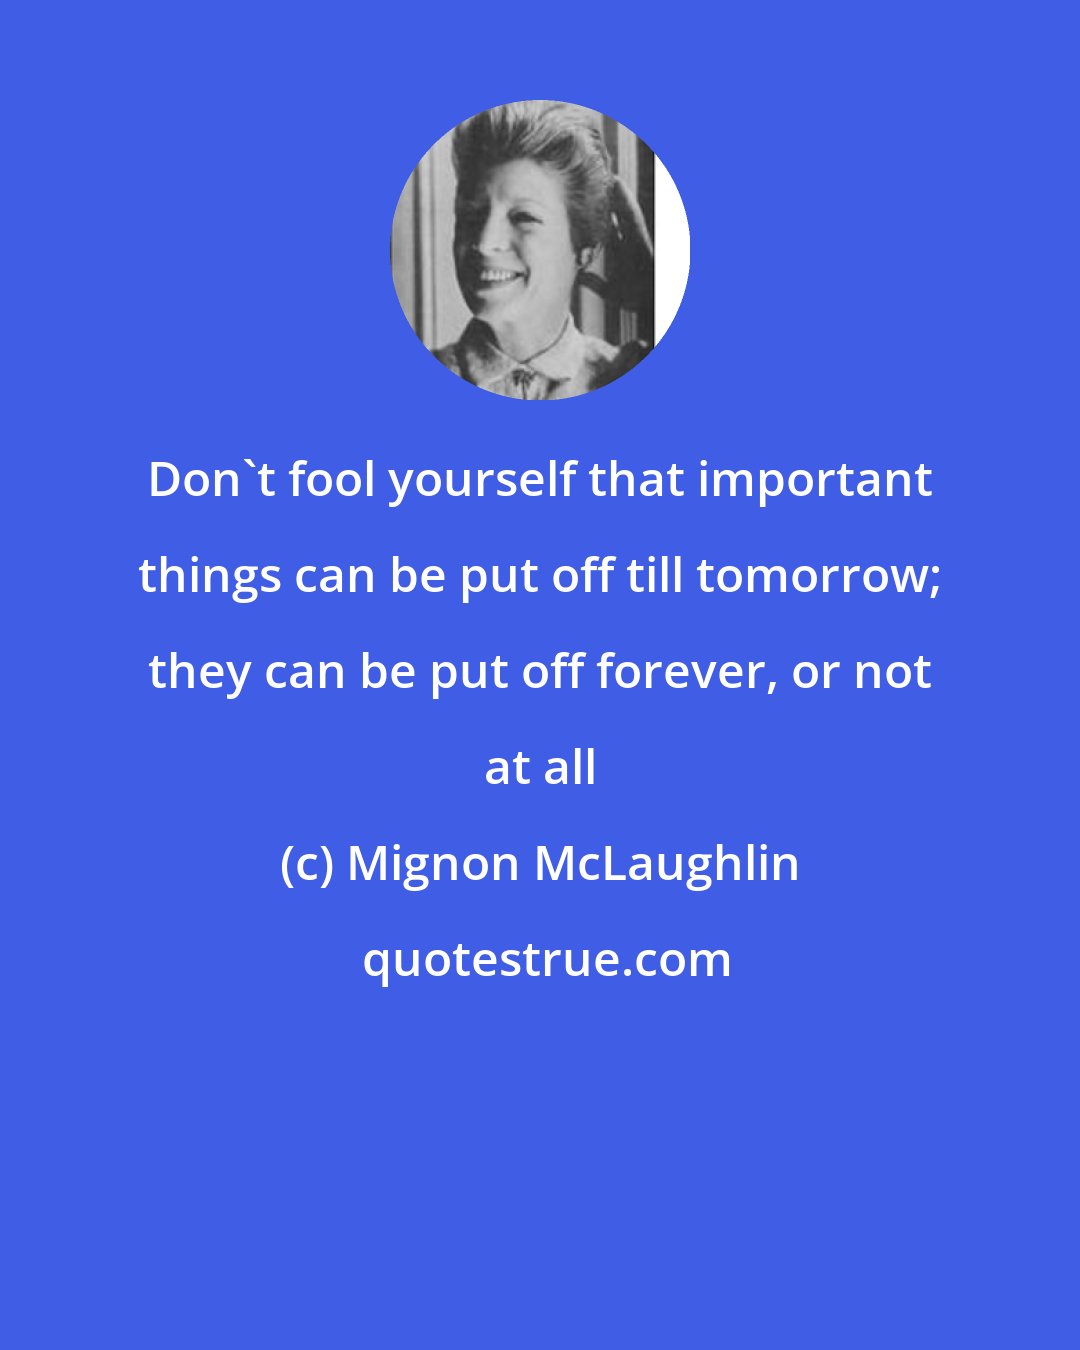 Mignon McLaughlin: Don't fool yourself that important things can be put off till tomorrow; they can be put off forever, or not at all